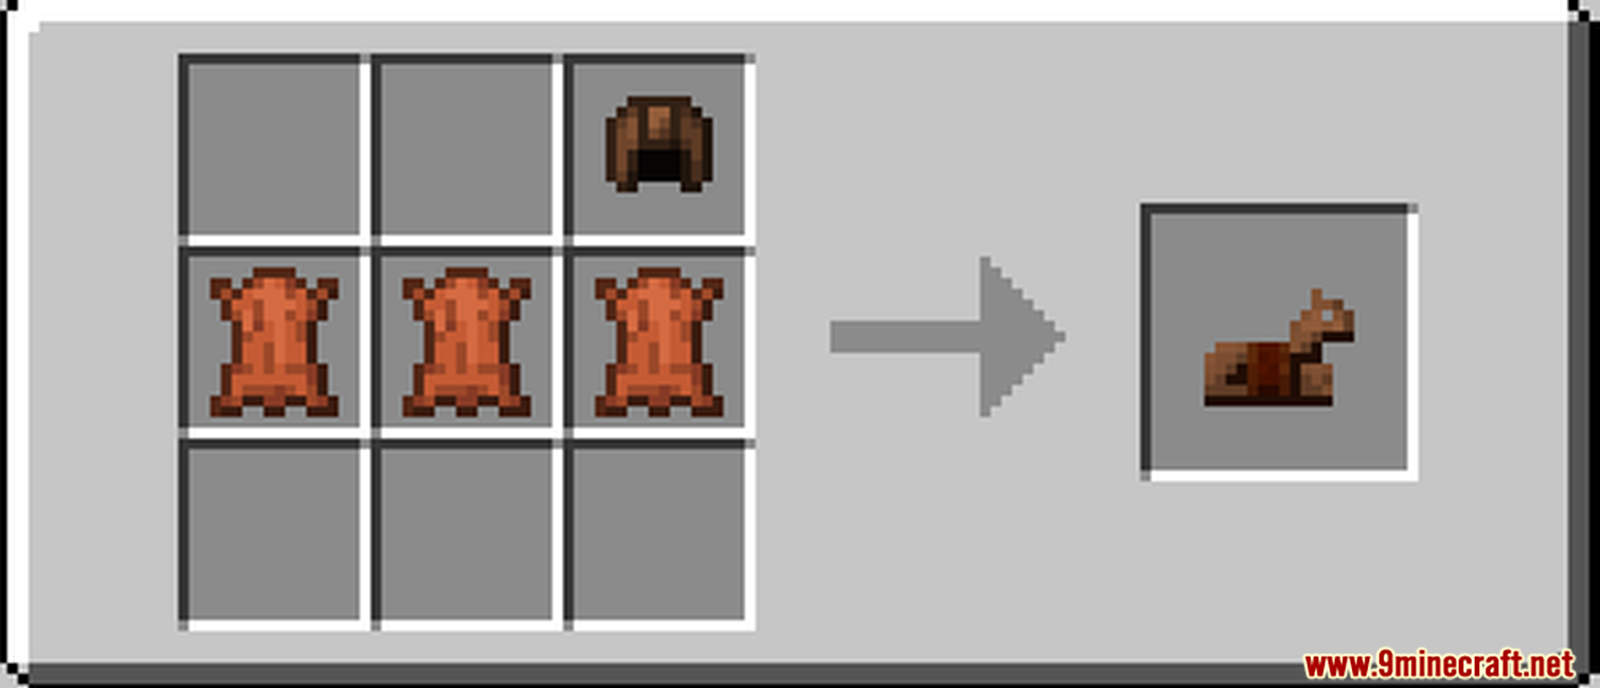 Horse Armor Crafting Data Pack Recipes (1)